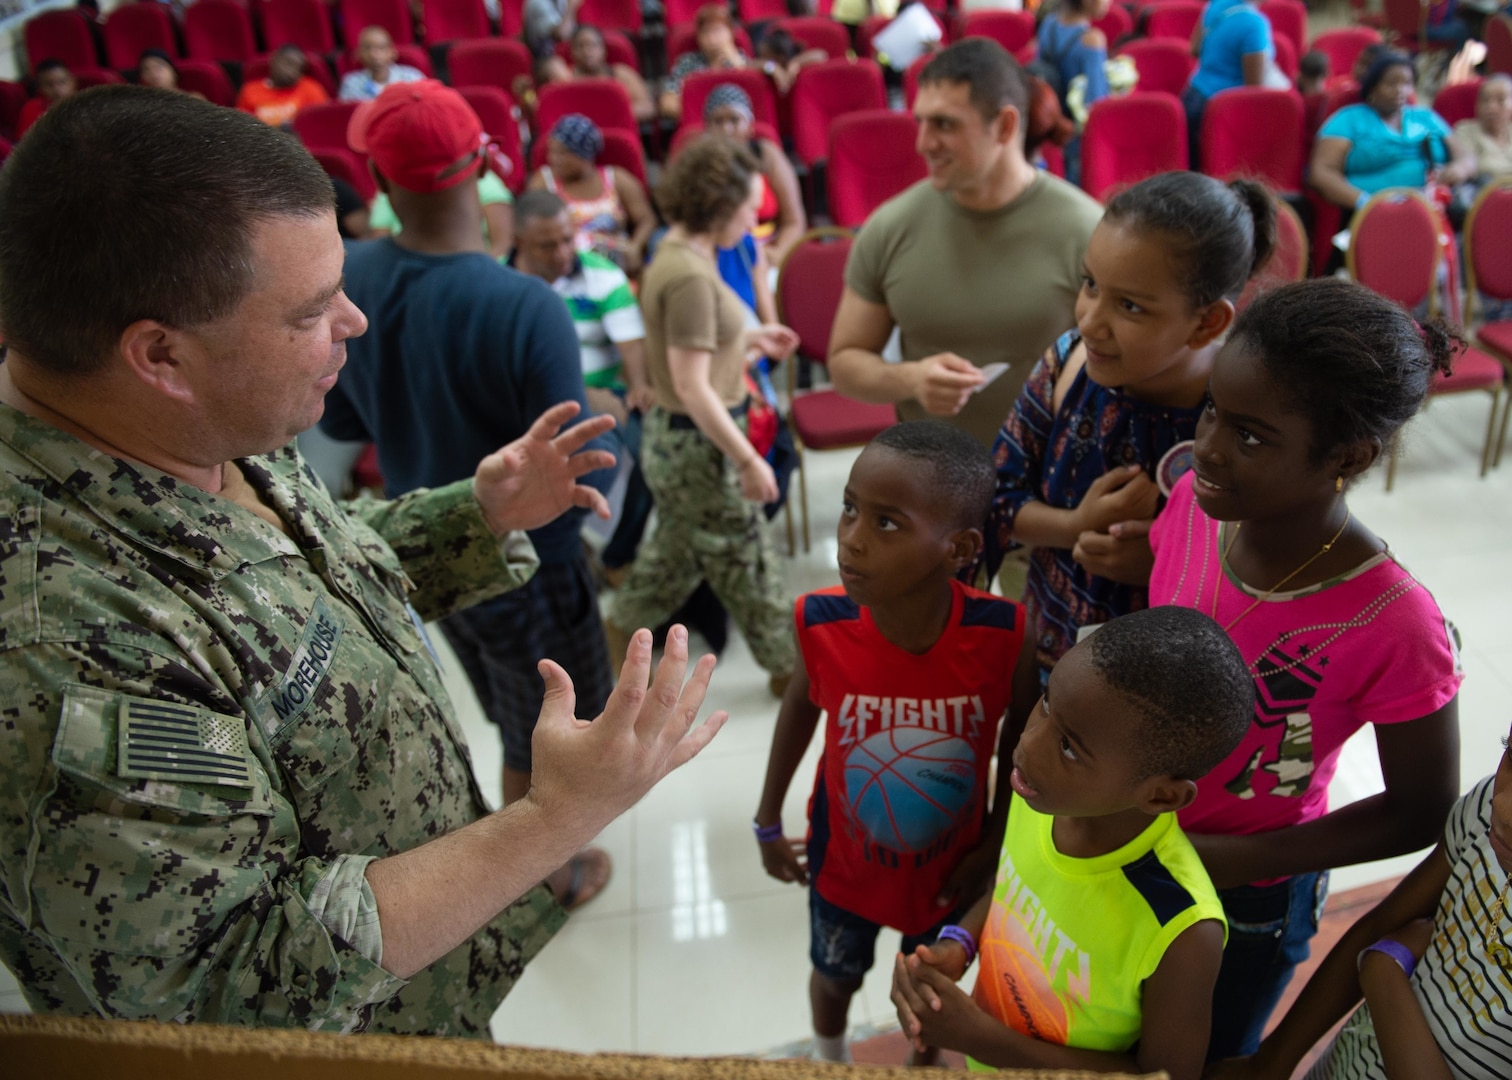 A U.S. military person speaks to children.